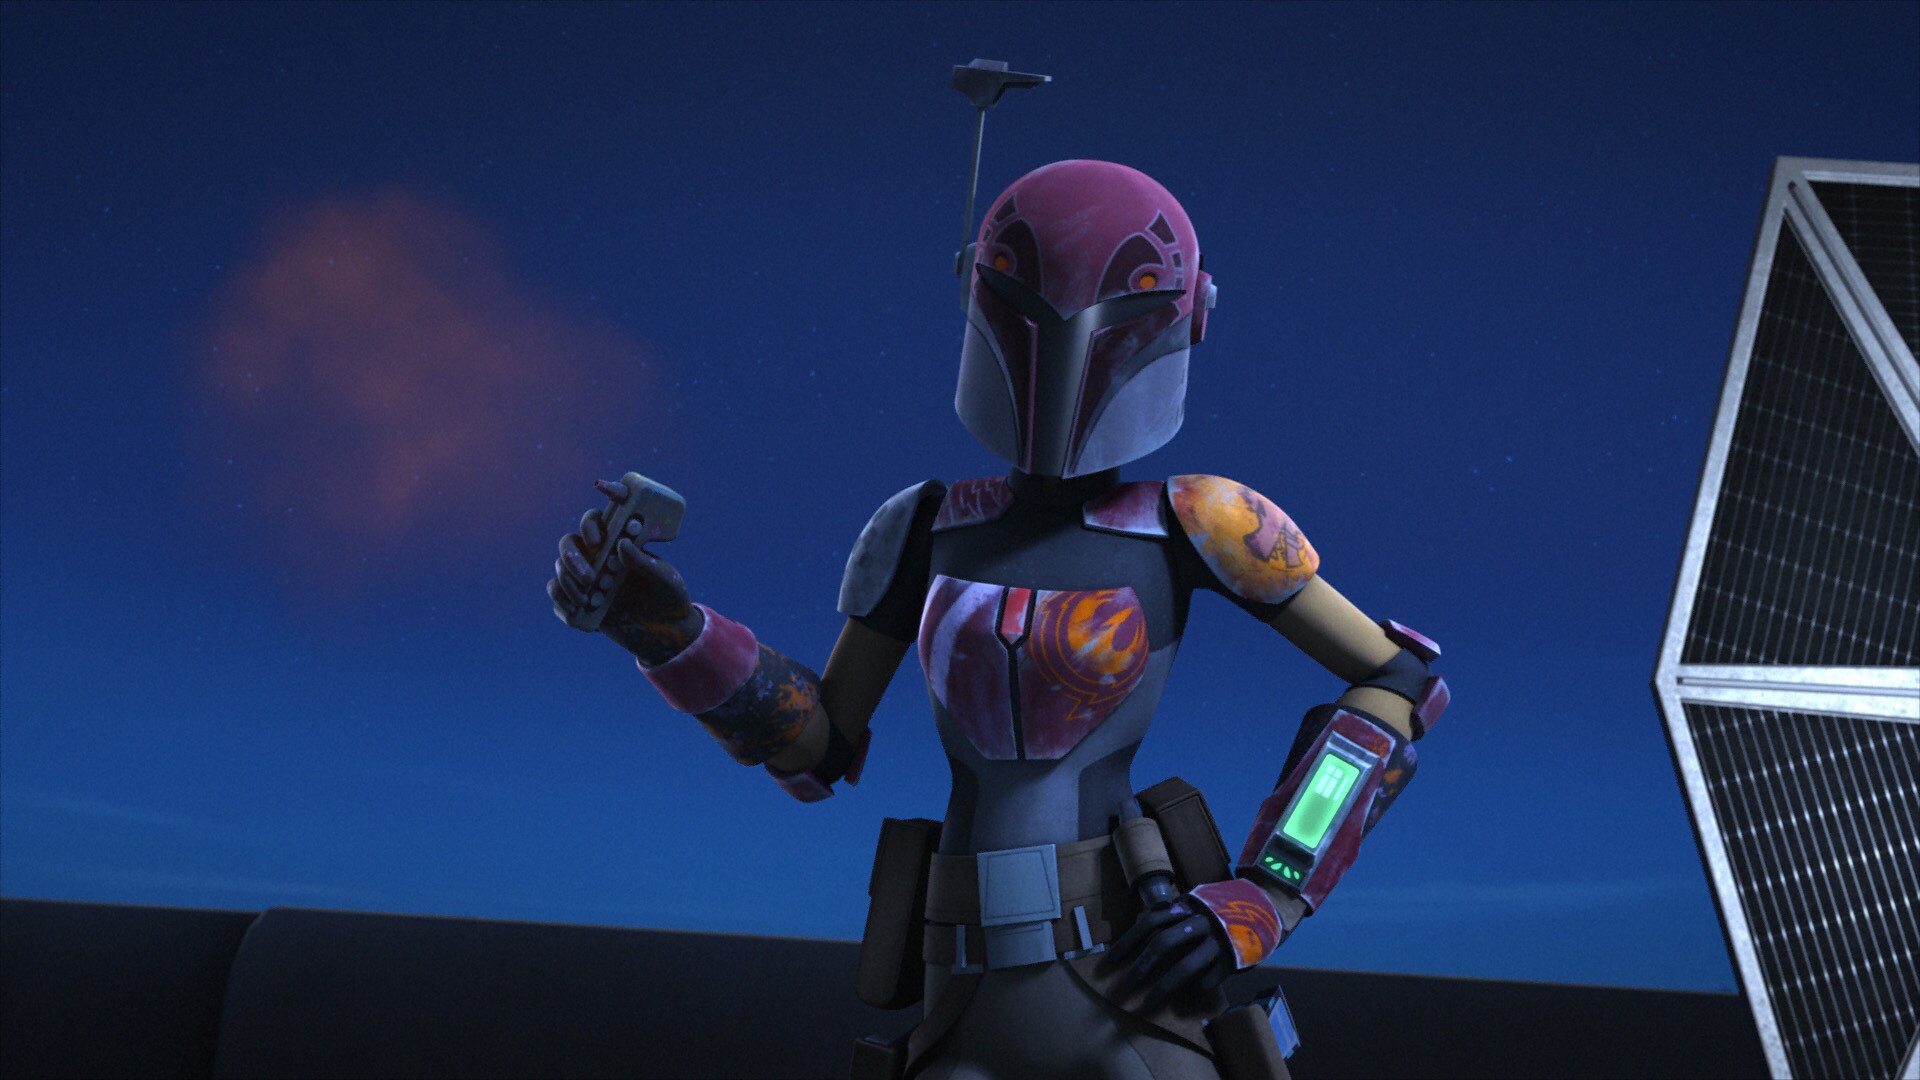 Sabine expressed herself with ever-evolving hairstyles and one-of-a-kind armor.